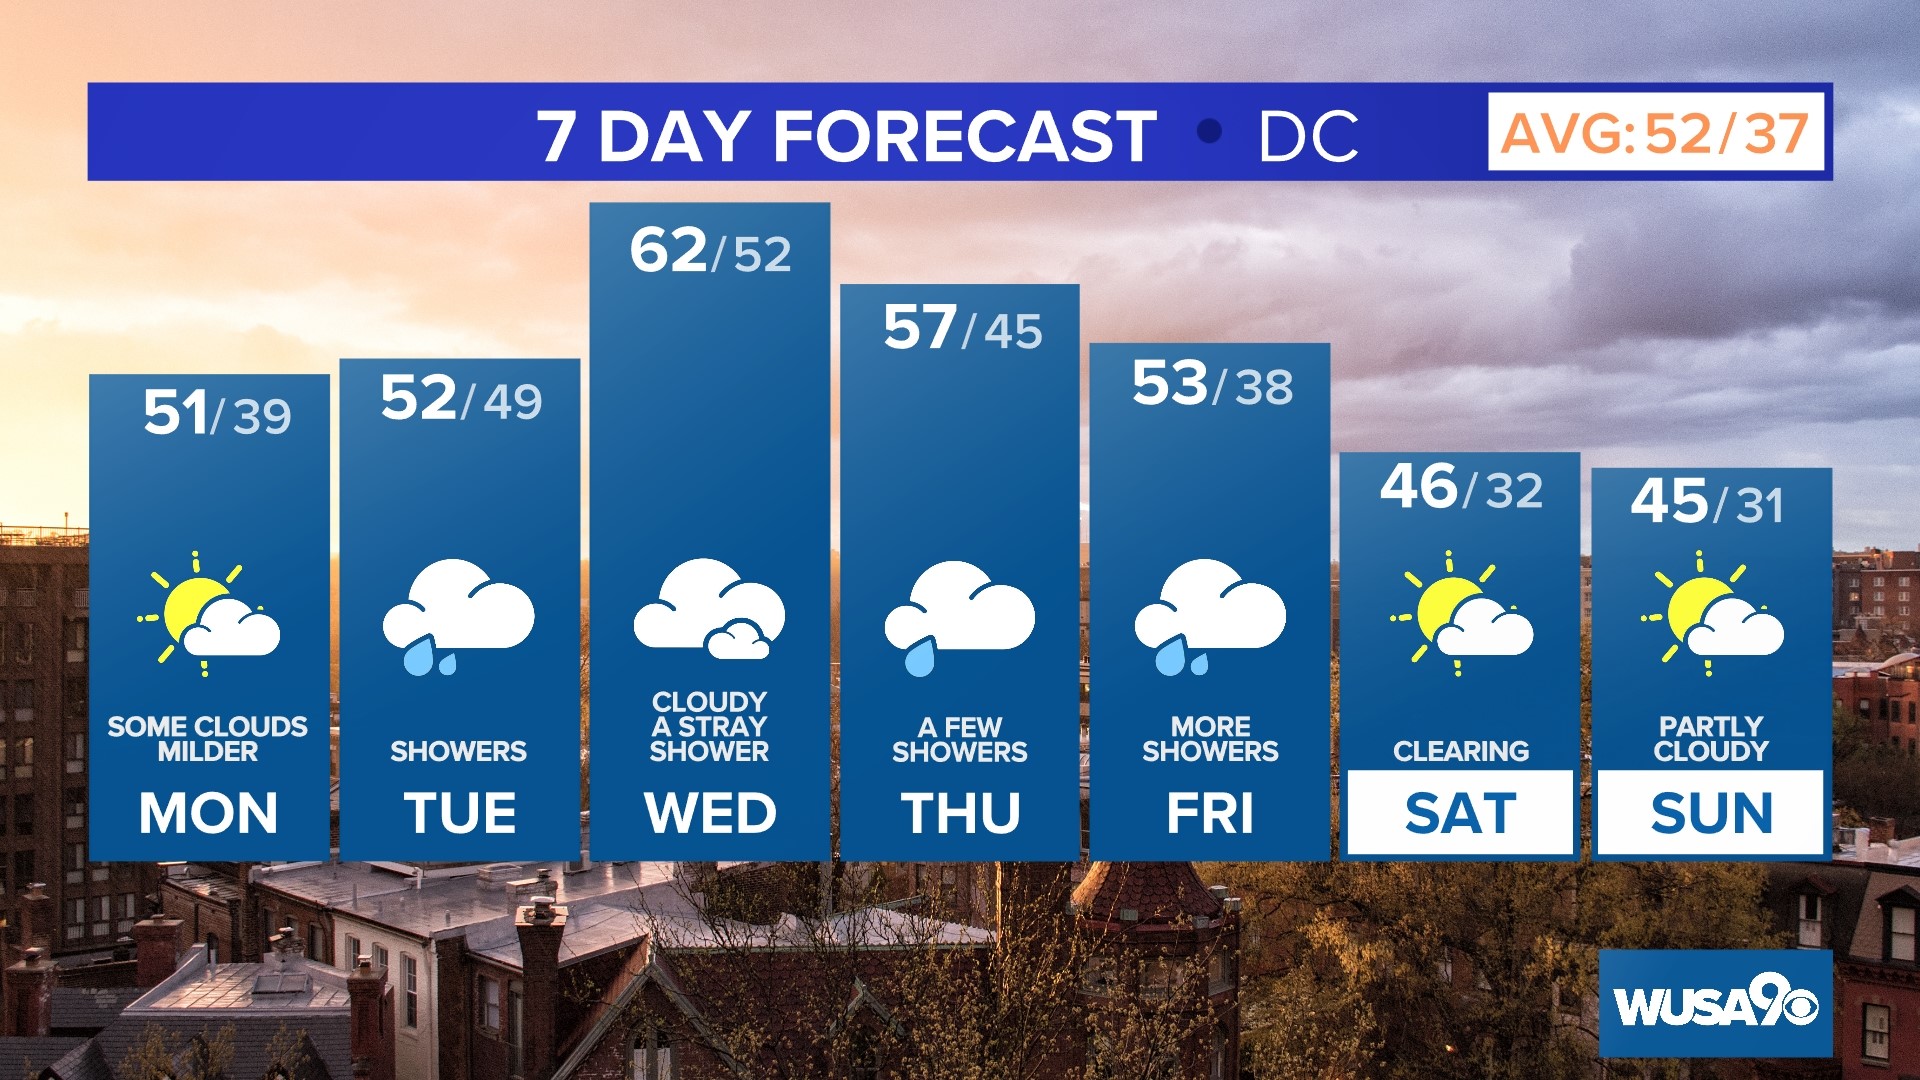 Seasonal to start the work week. Keep the umbrella close as there is a good amount of wet weather in the forecast!